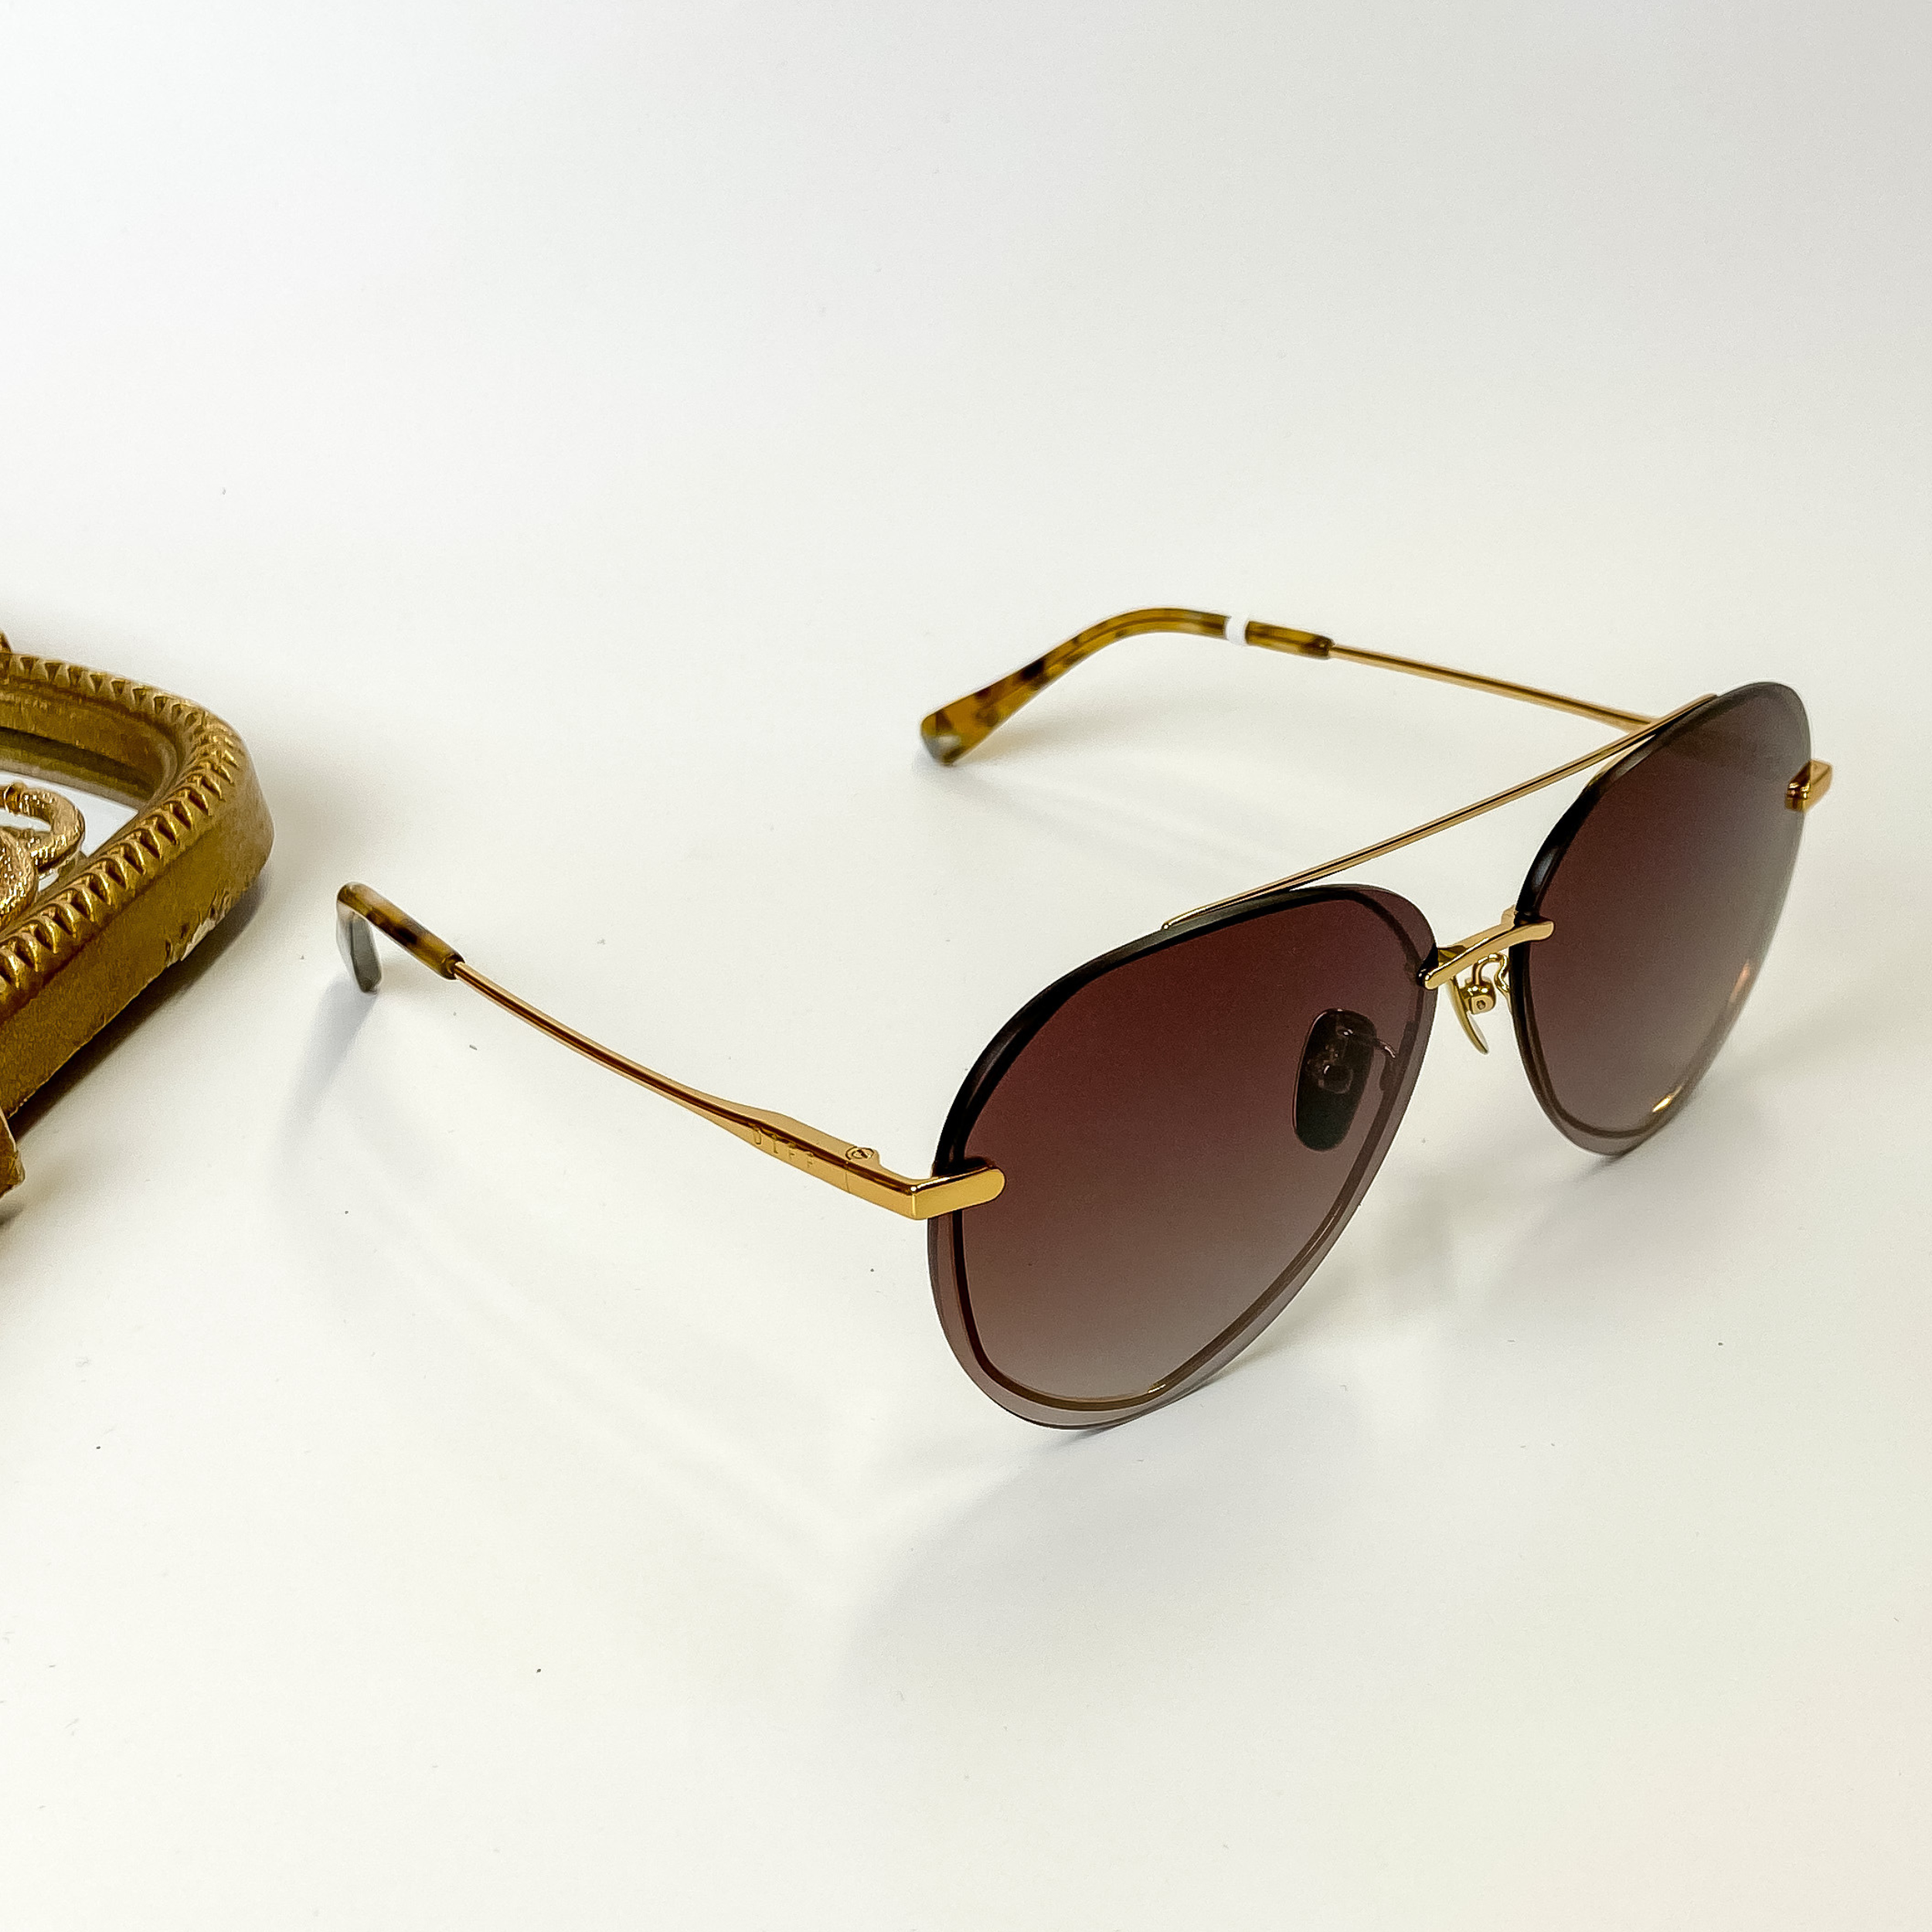 A pair of gold-tone aviator style glasses with brown lenses. These sunglasses are pictured on a white background with gold jewelry.